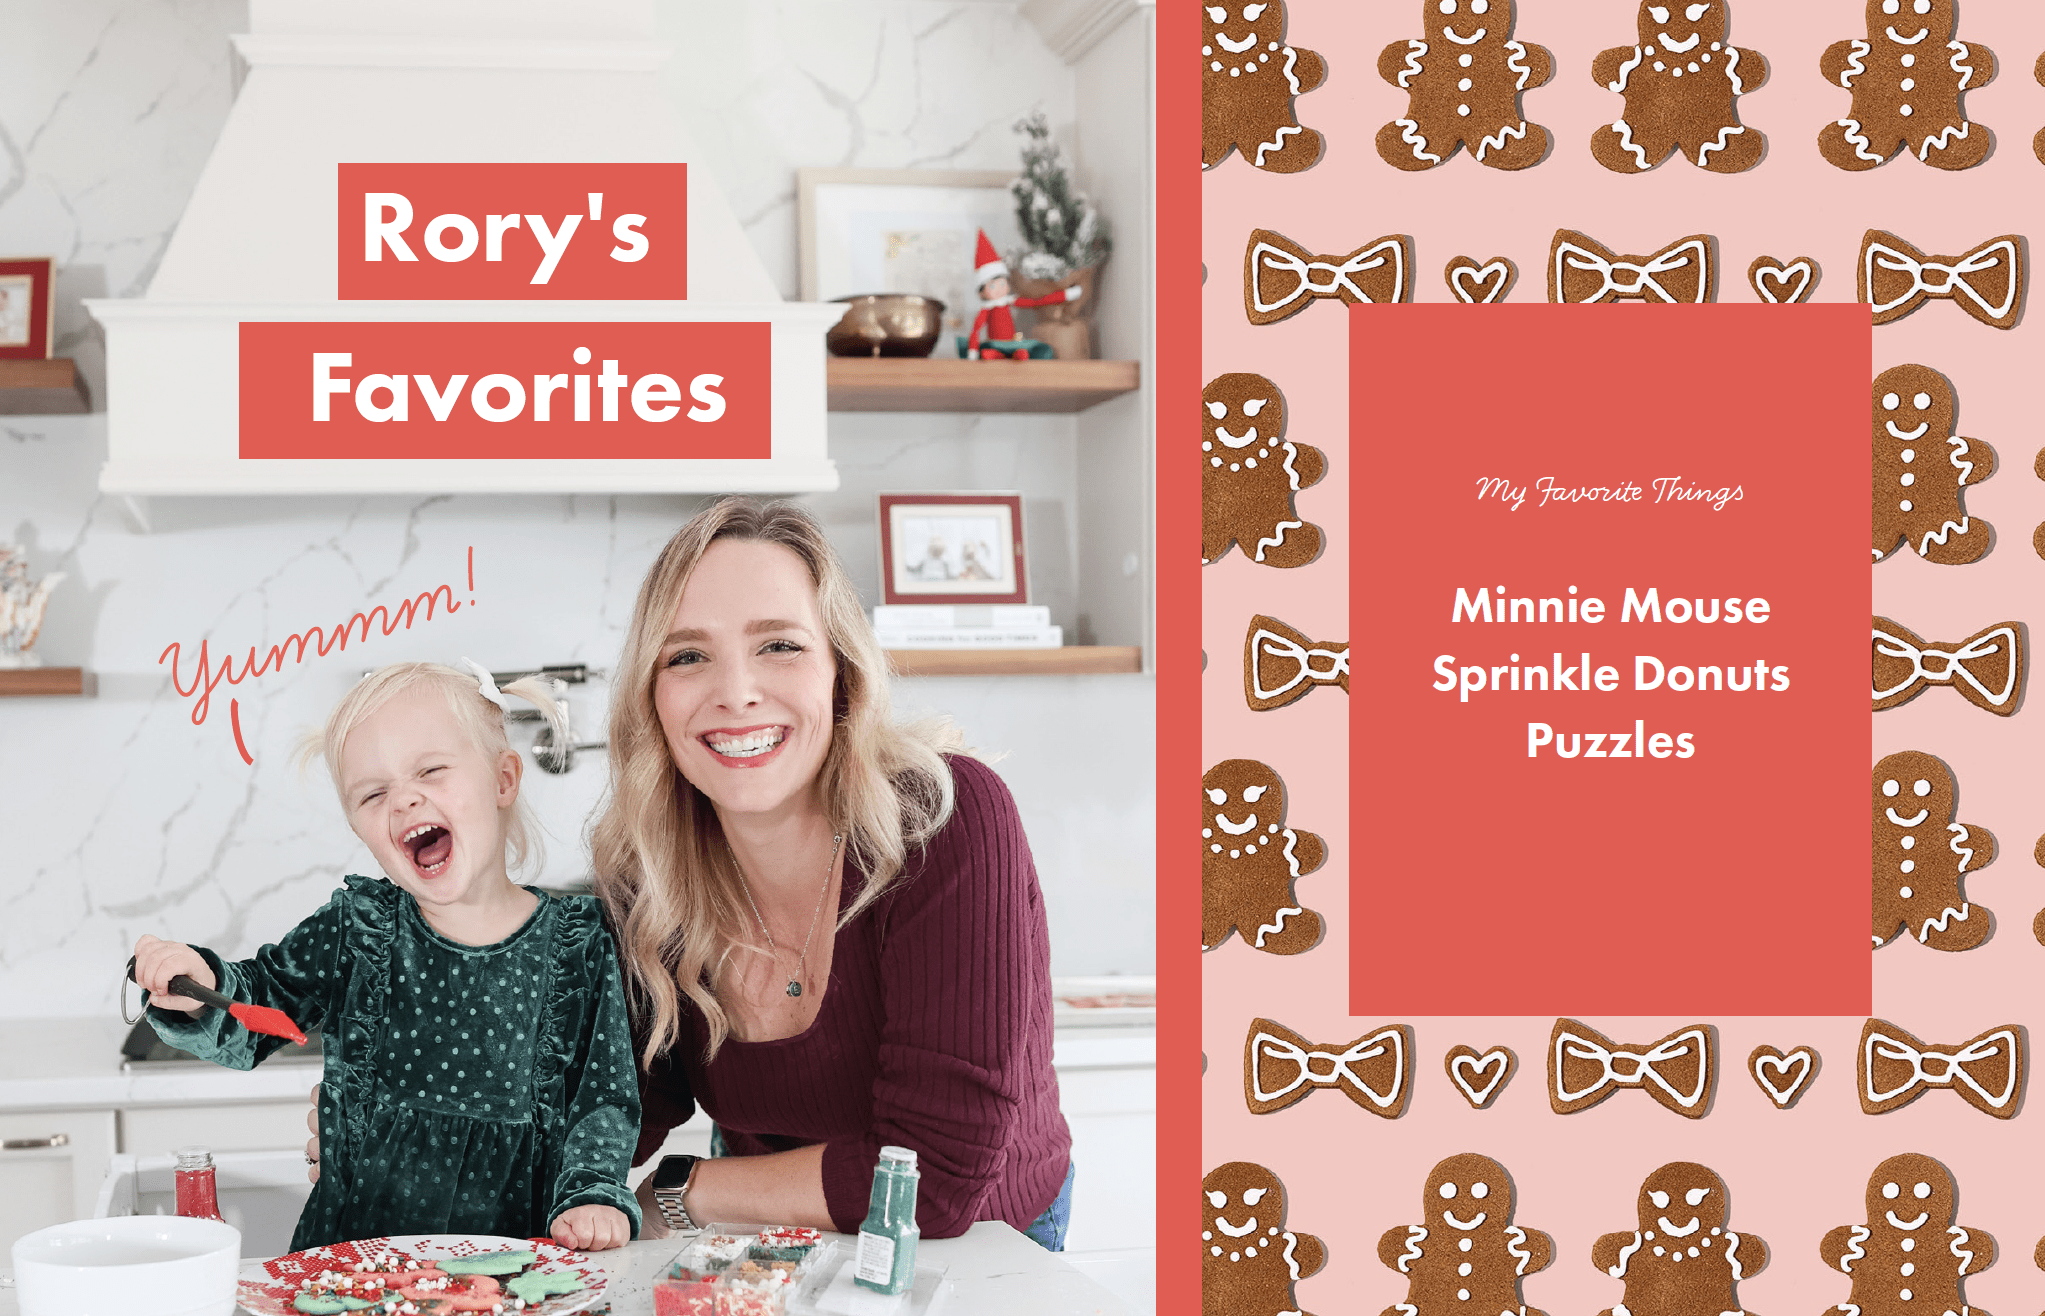 Rory's favorites from the gift guide